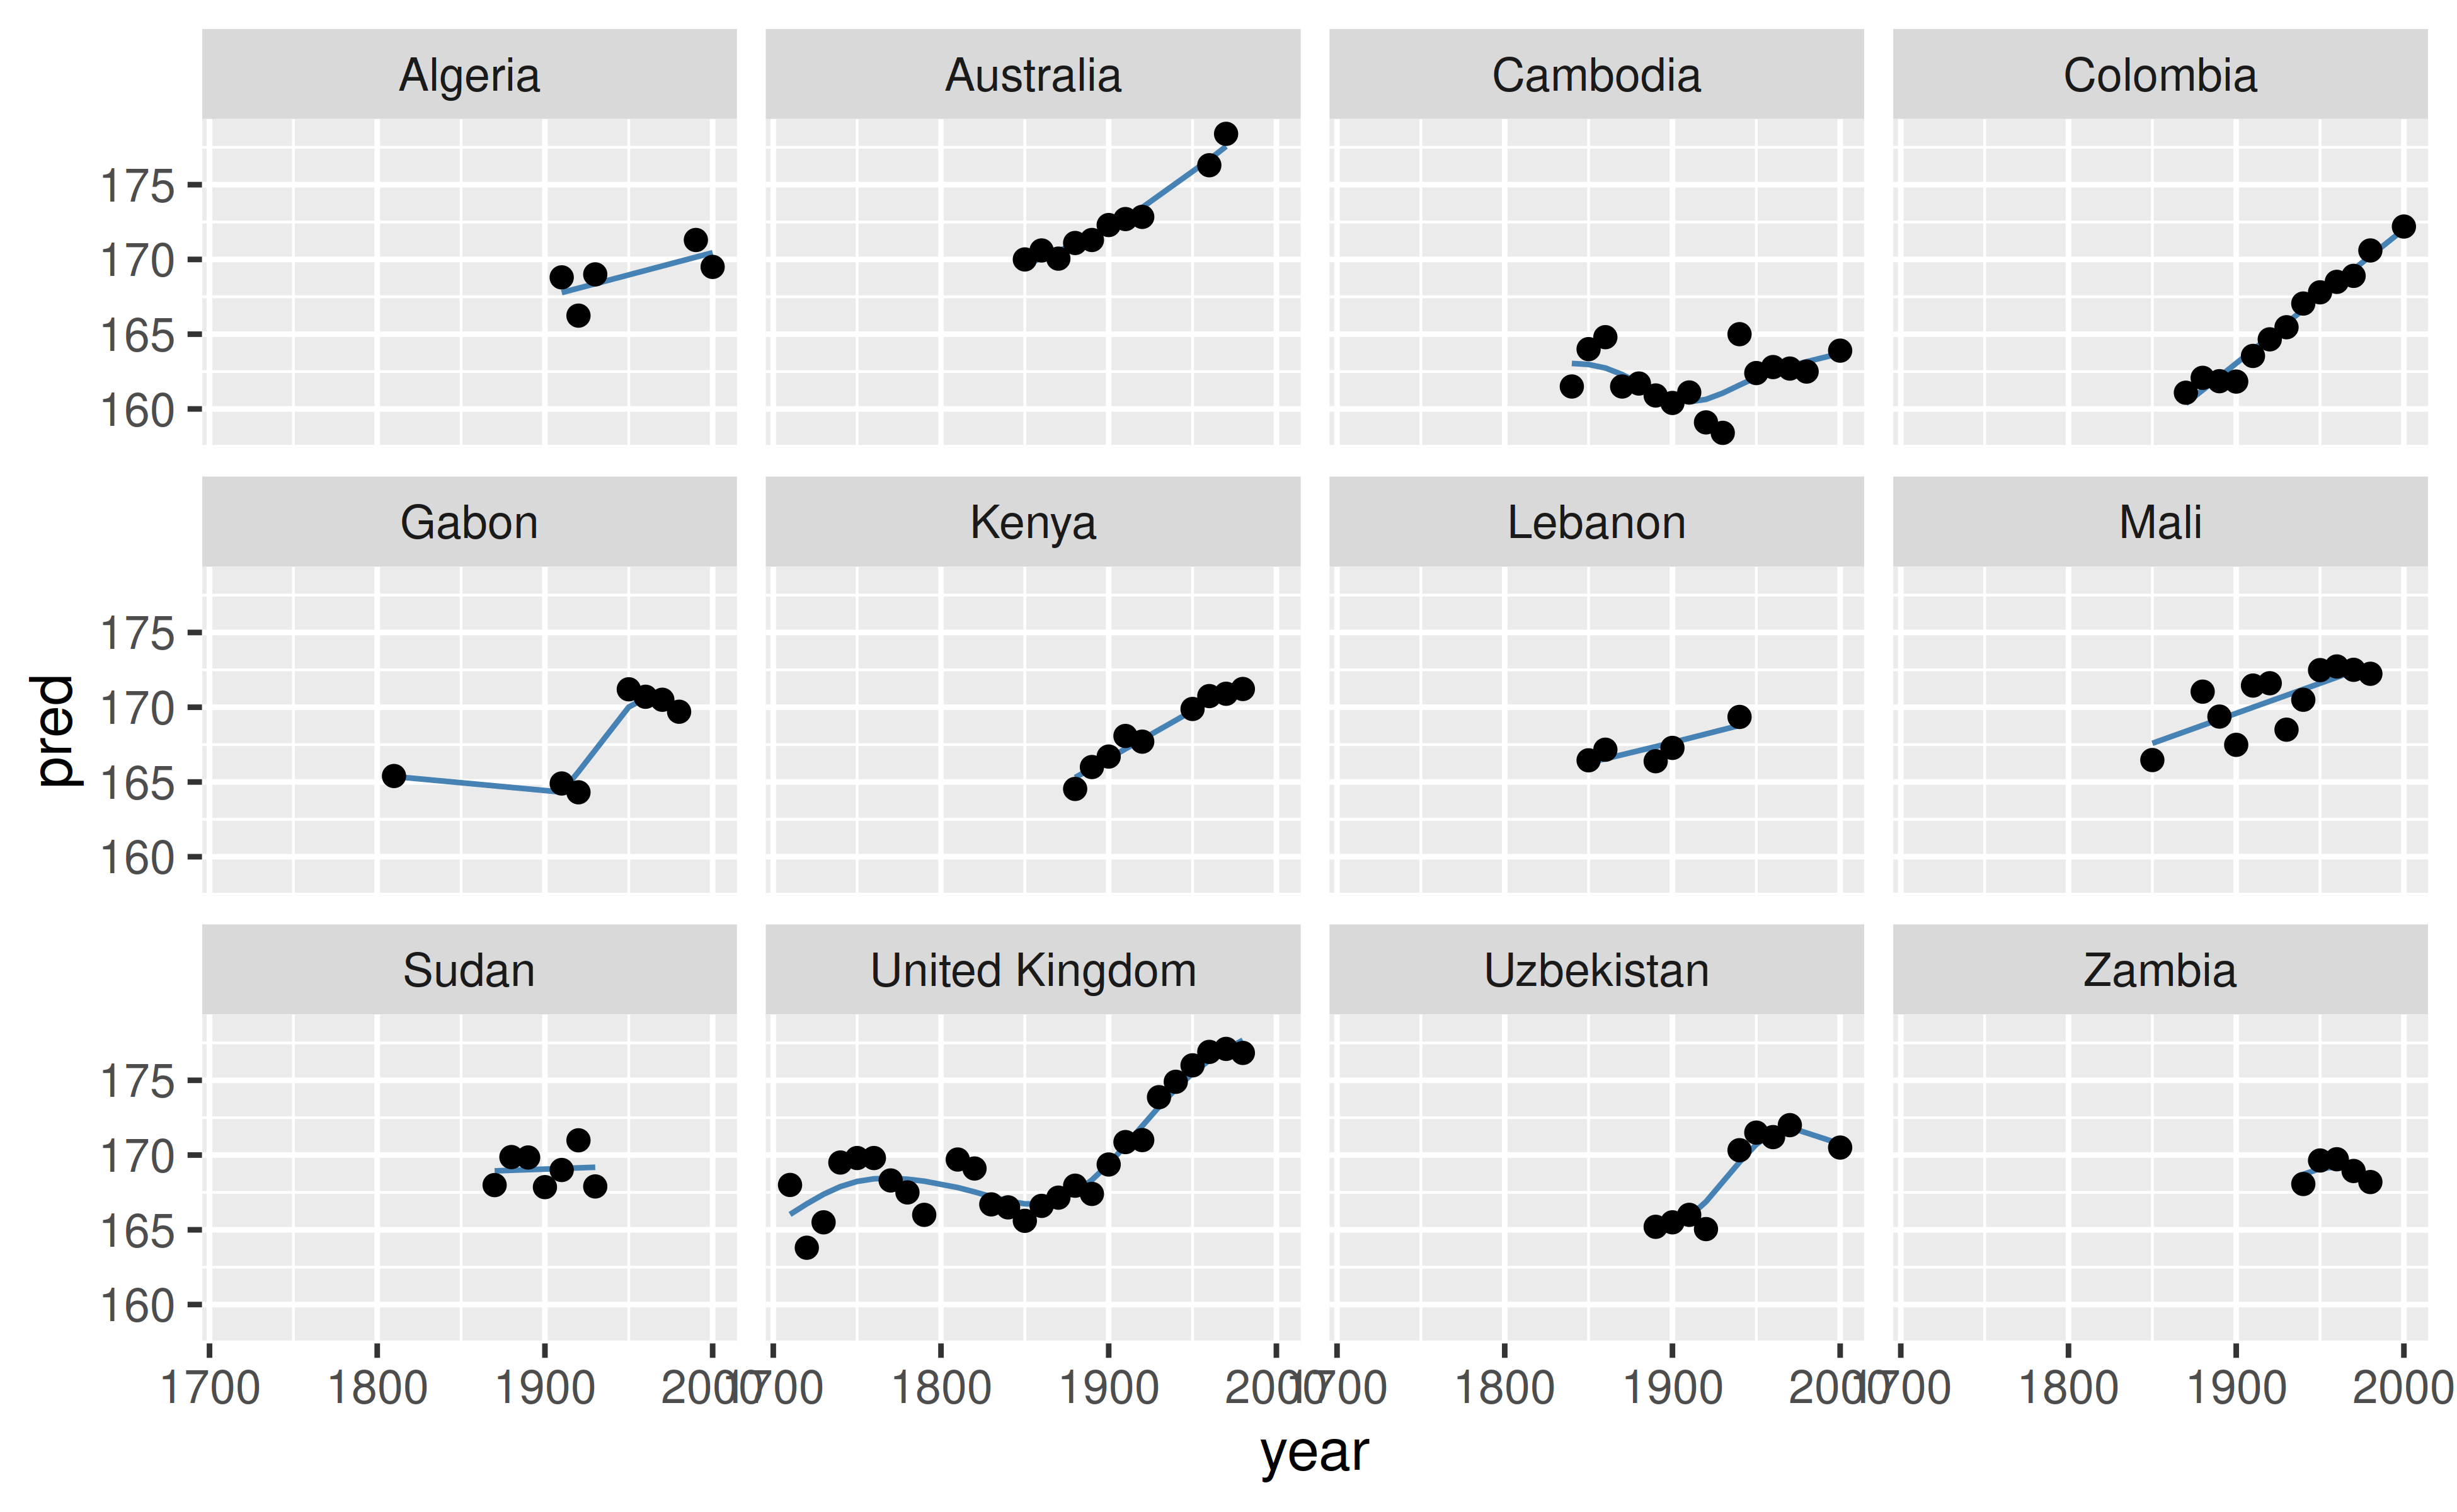 Exploration of a random sample of the data. This shows the data points of 12 countries, with the model fit in blue.